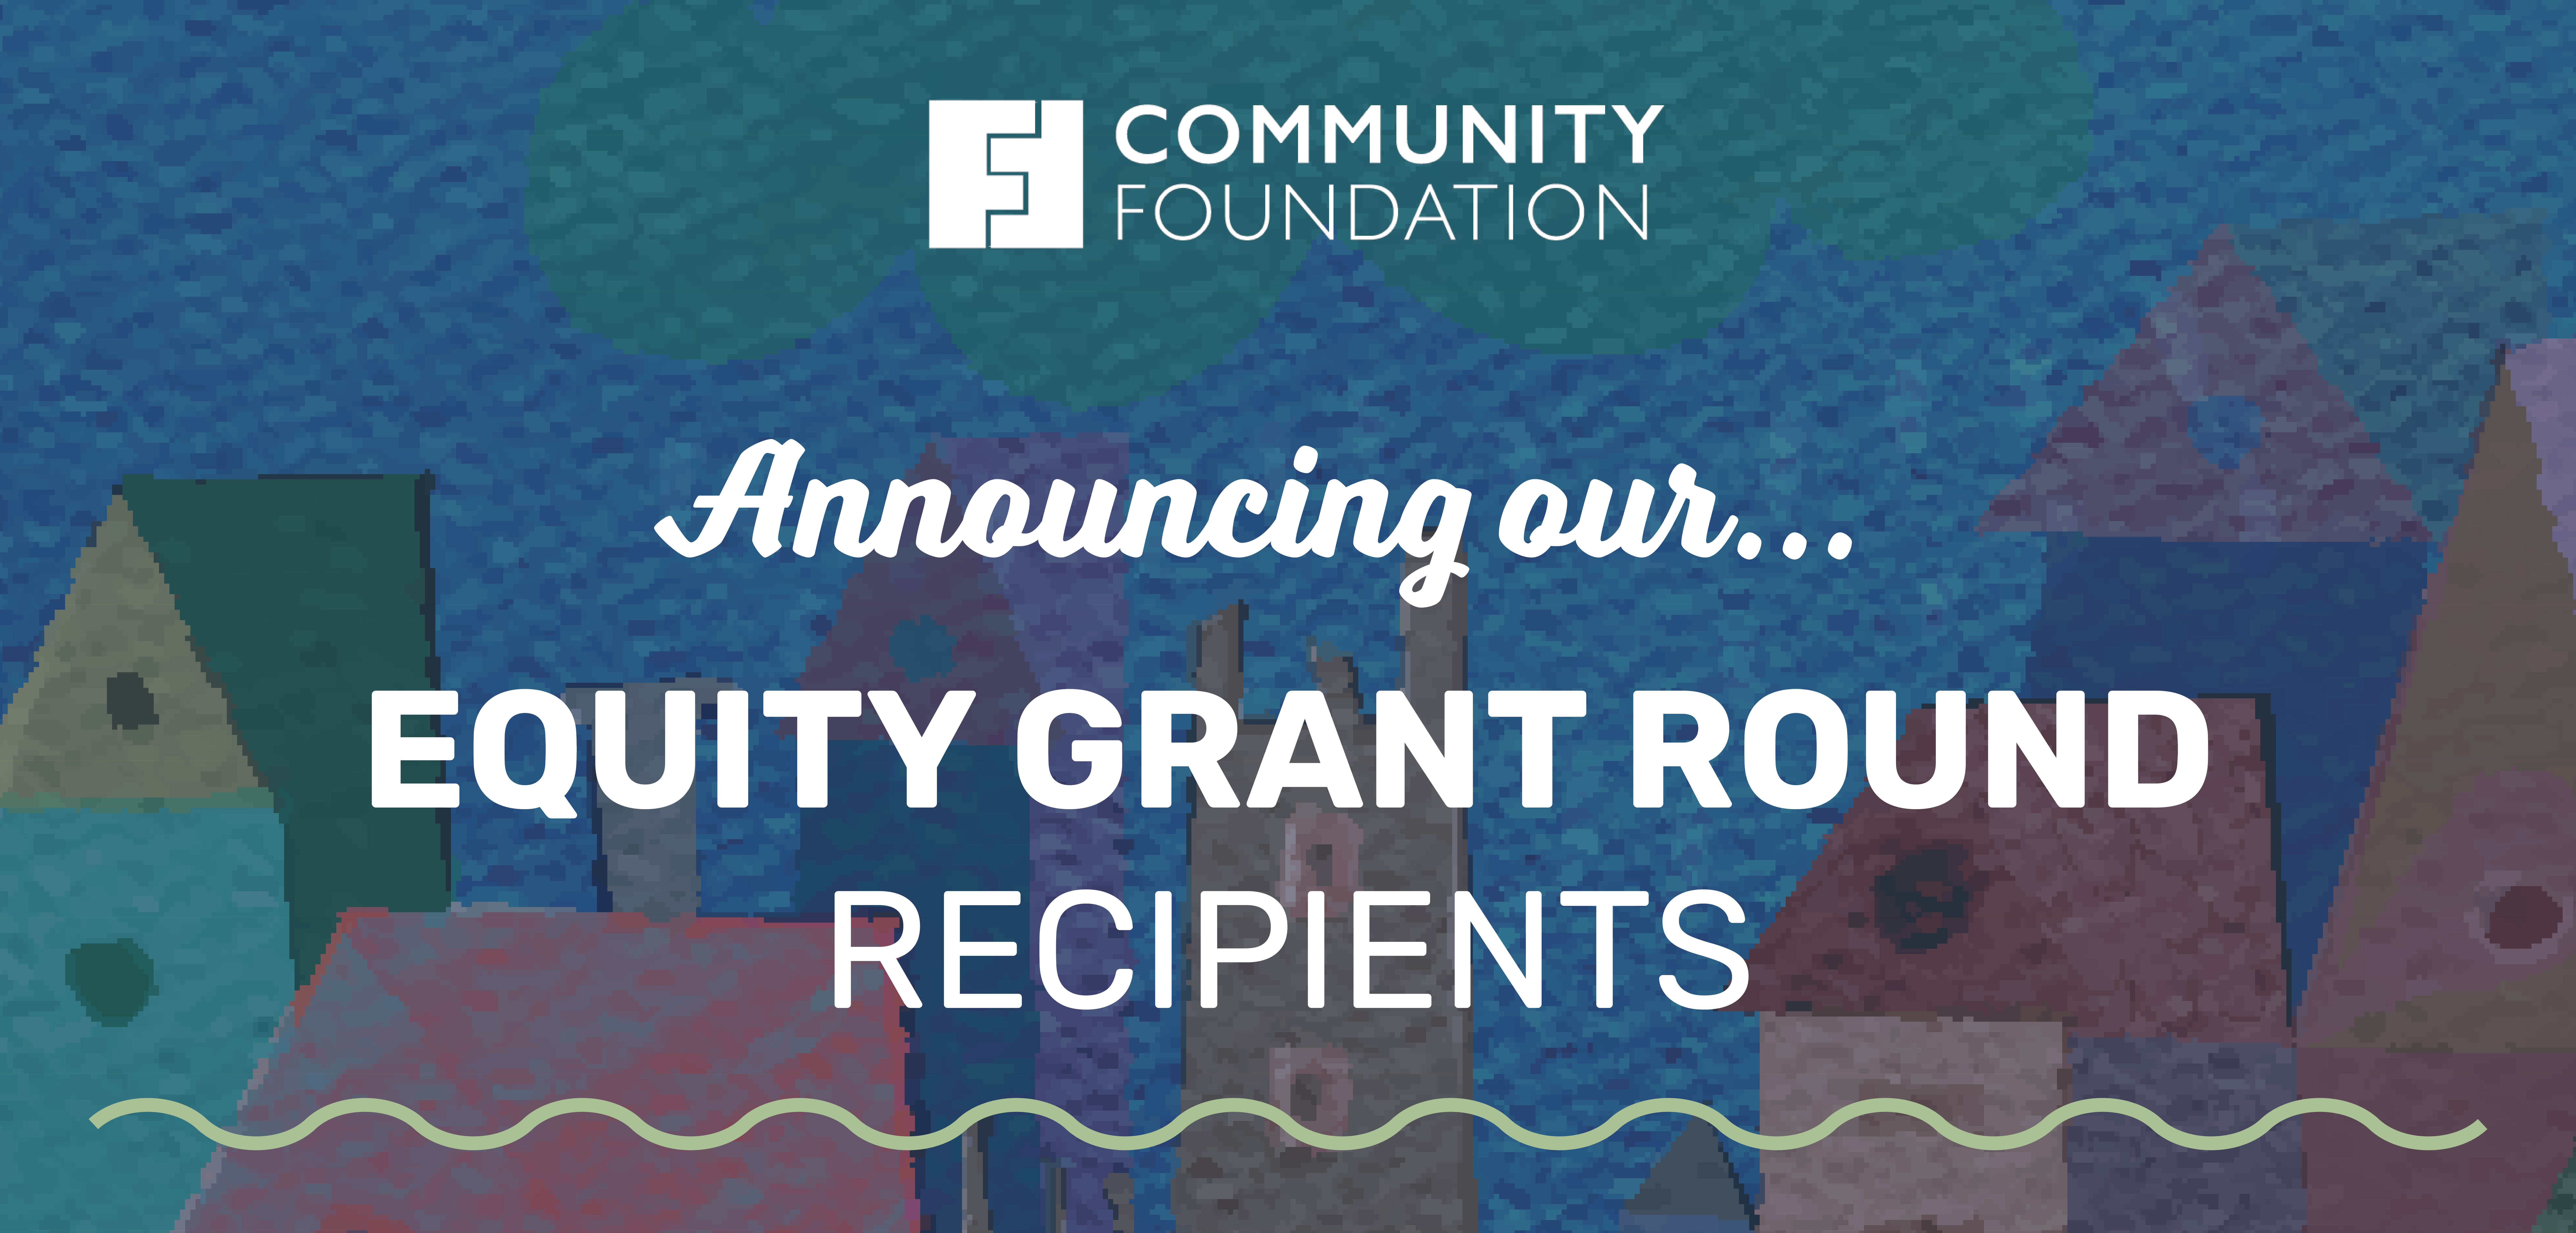 Equity Grant Round Recipients cropped v2